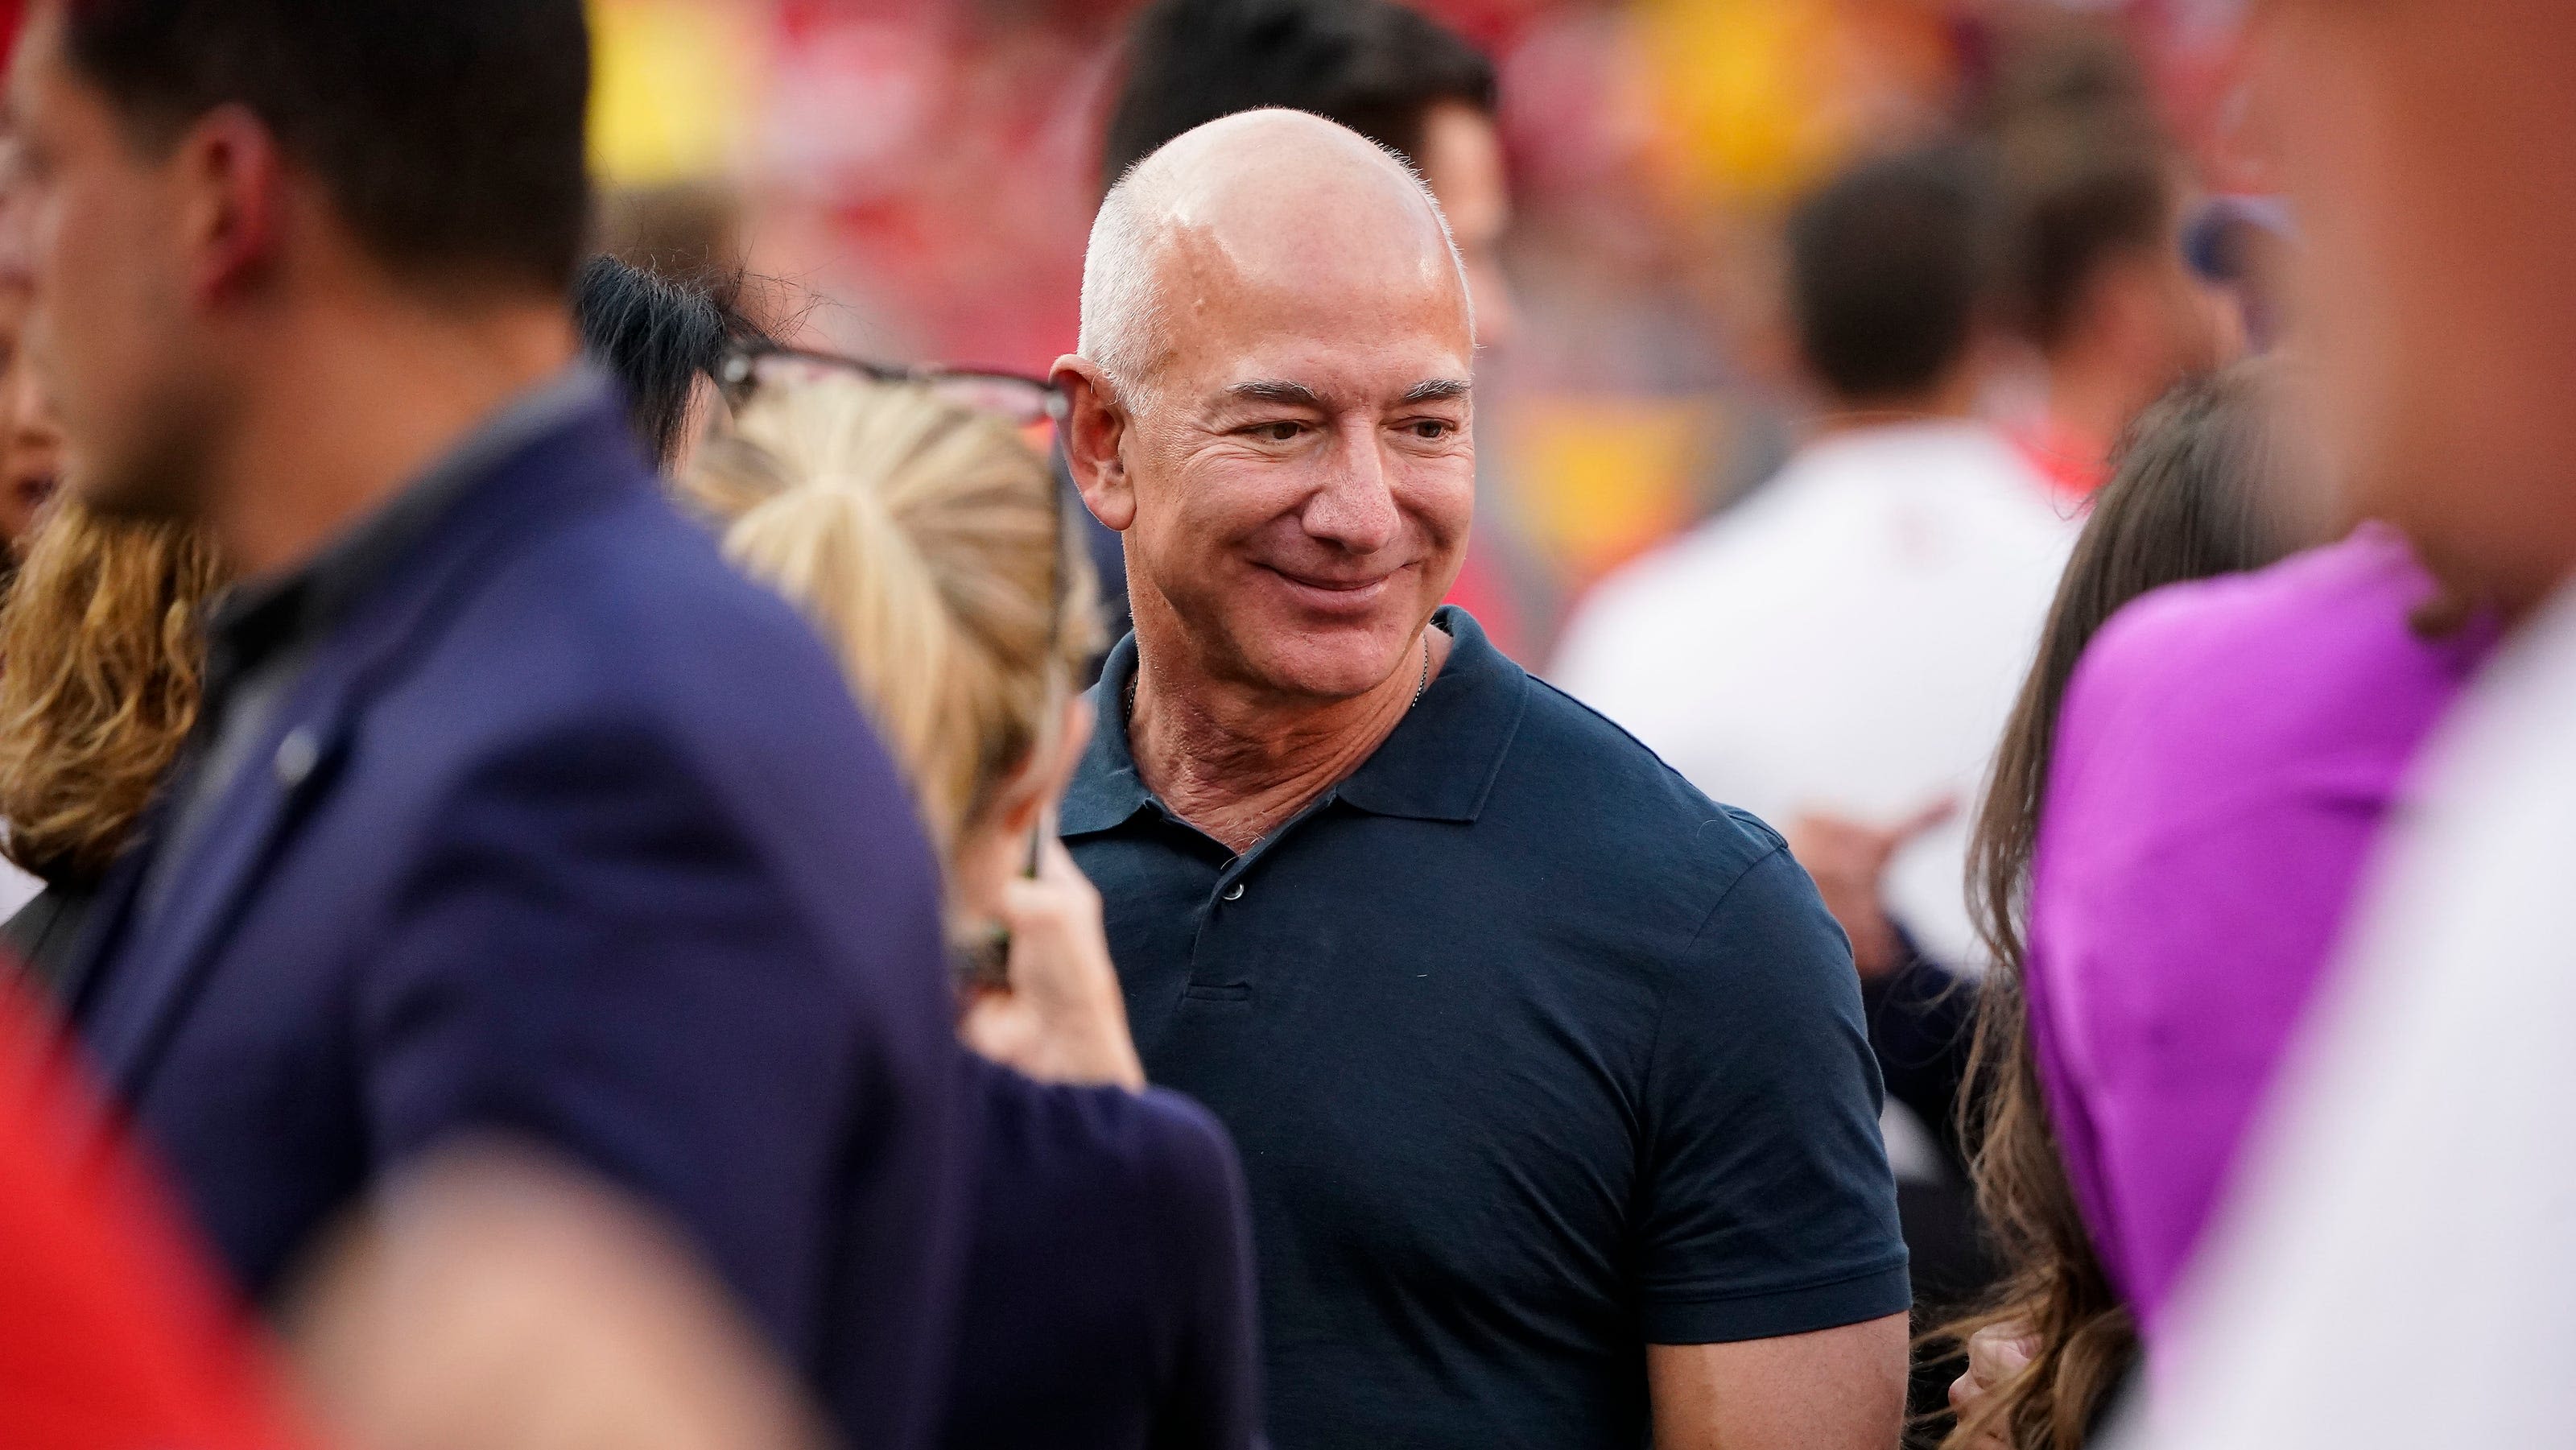 Jeff Bezos opening more tuition-free Bezos Academy preschools in Texas. Here's where